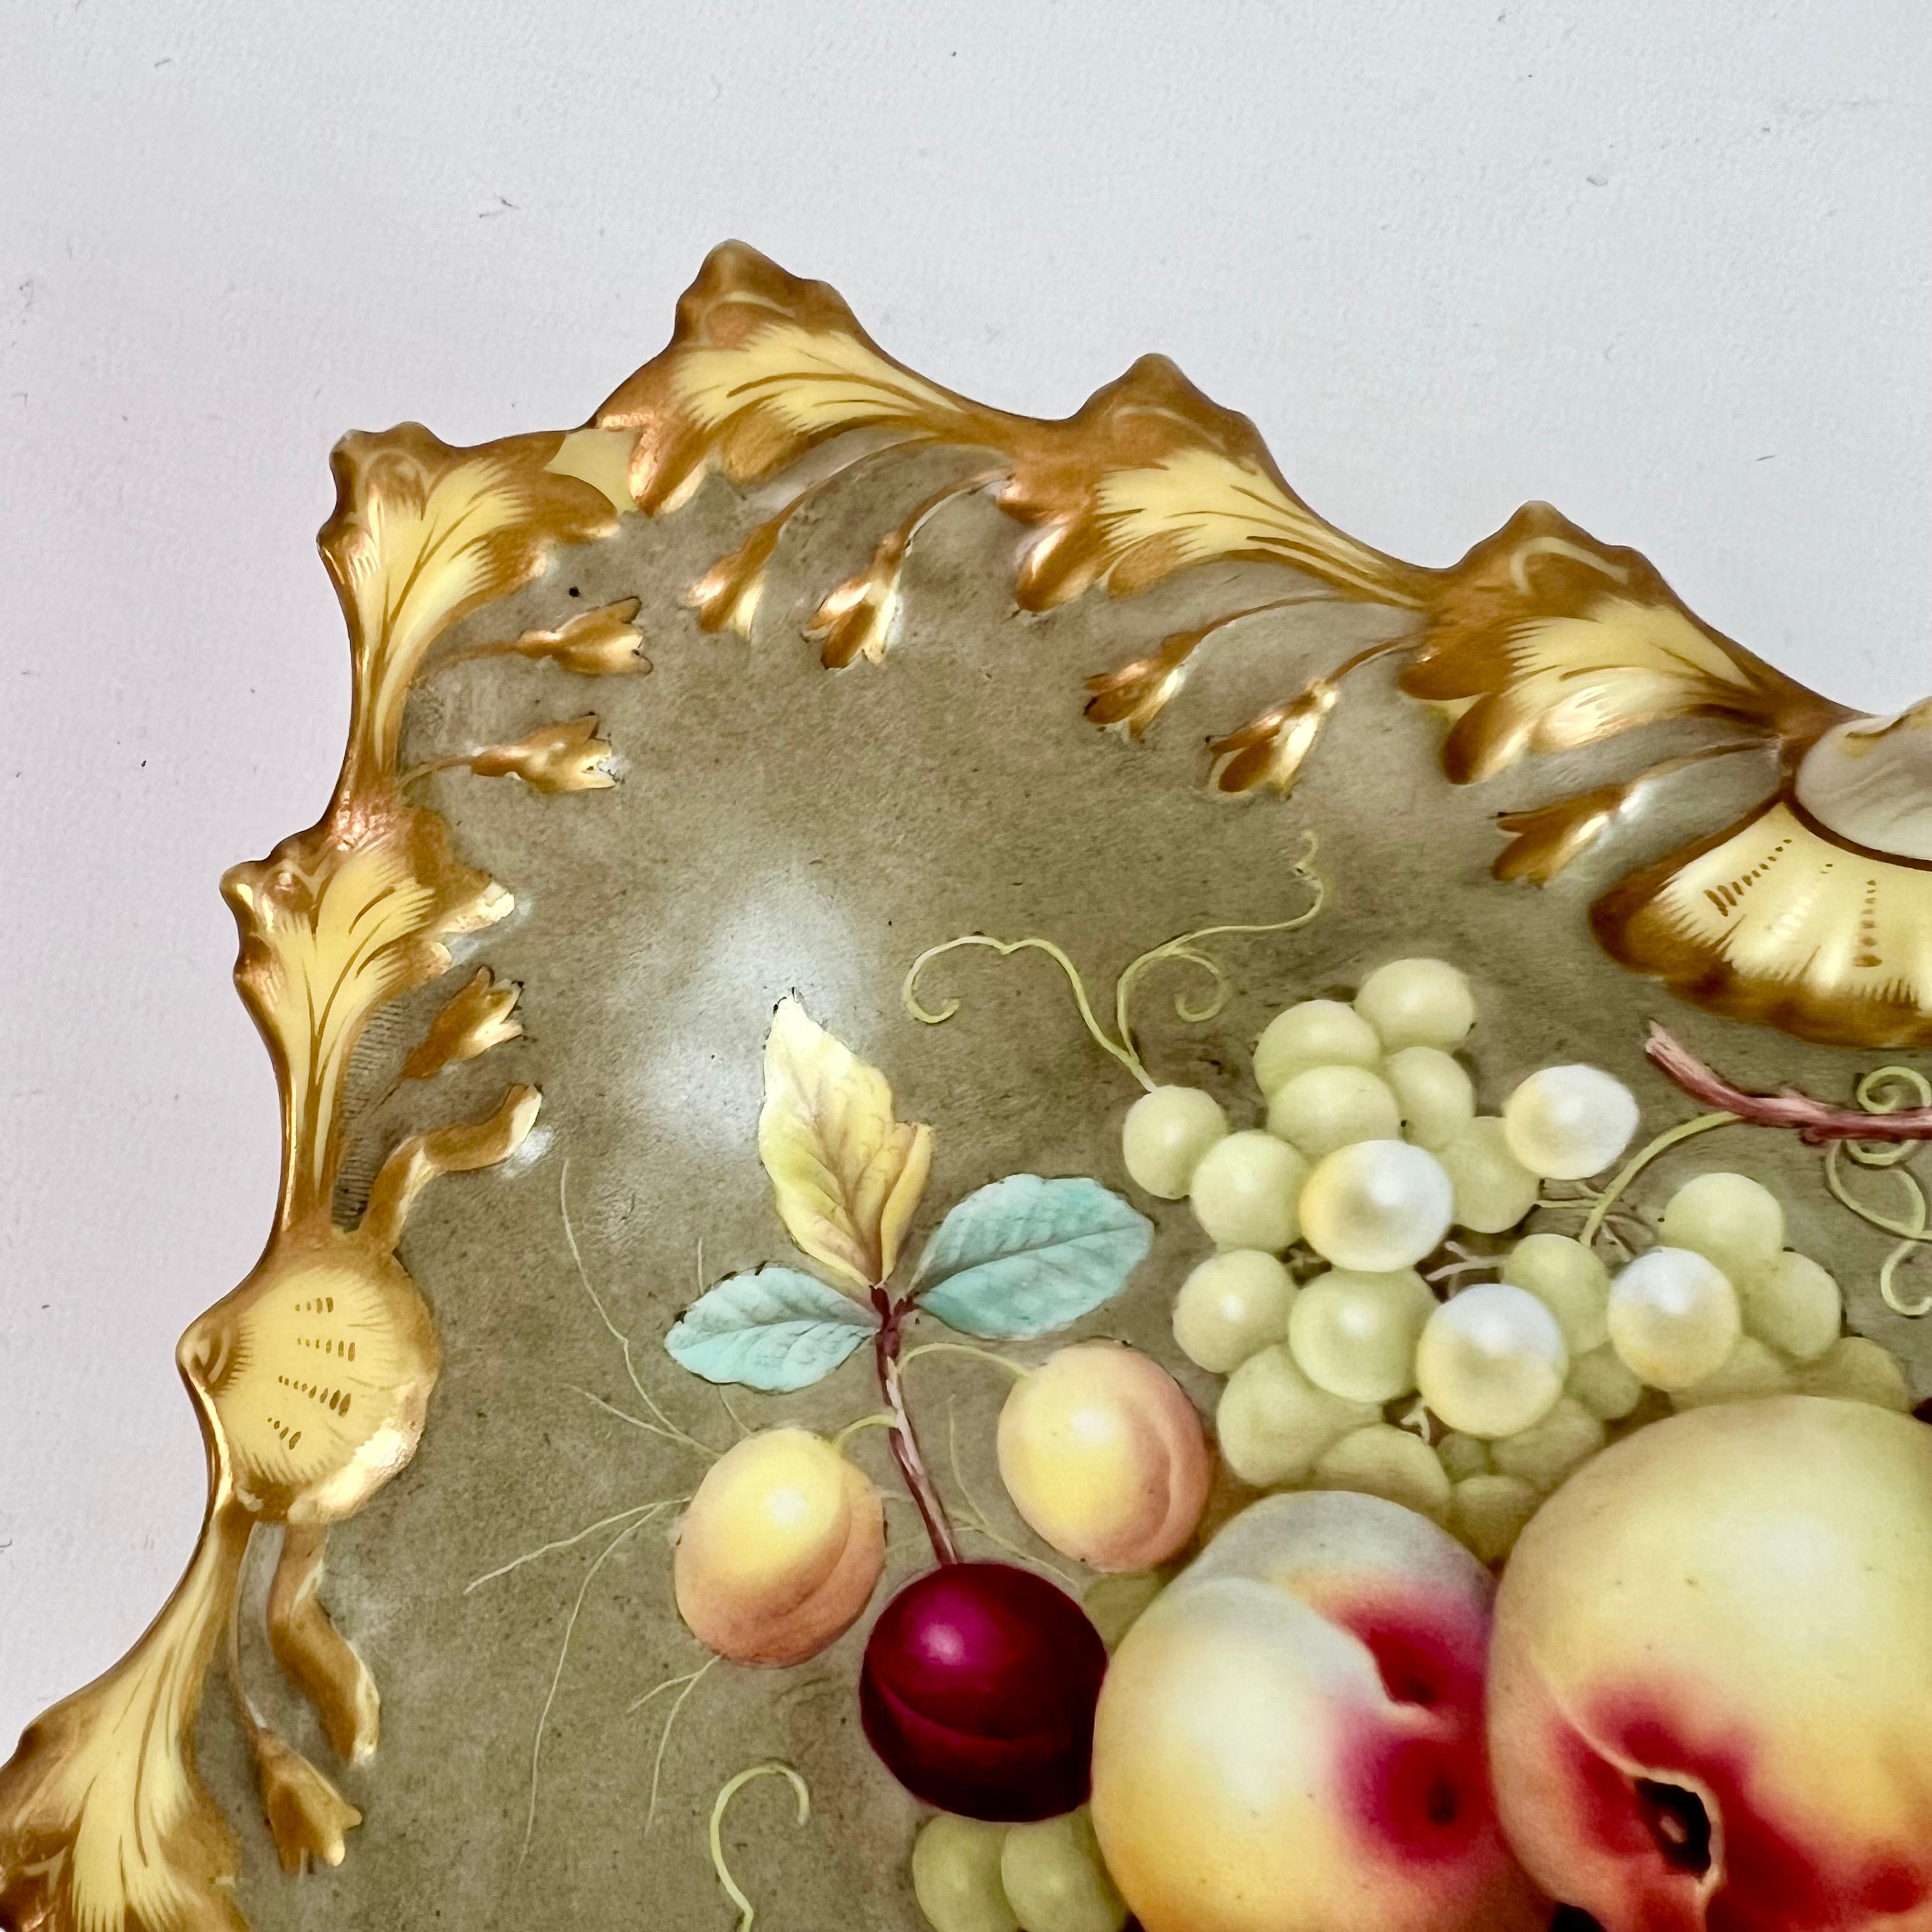 Mid-19th Century Chamberlains Worcester Porcelain Basket, Fruits by Thomas Steele, 1830-1832